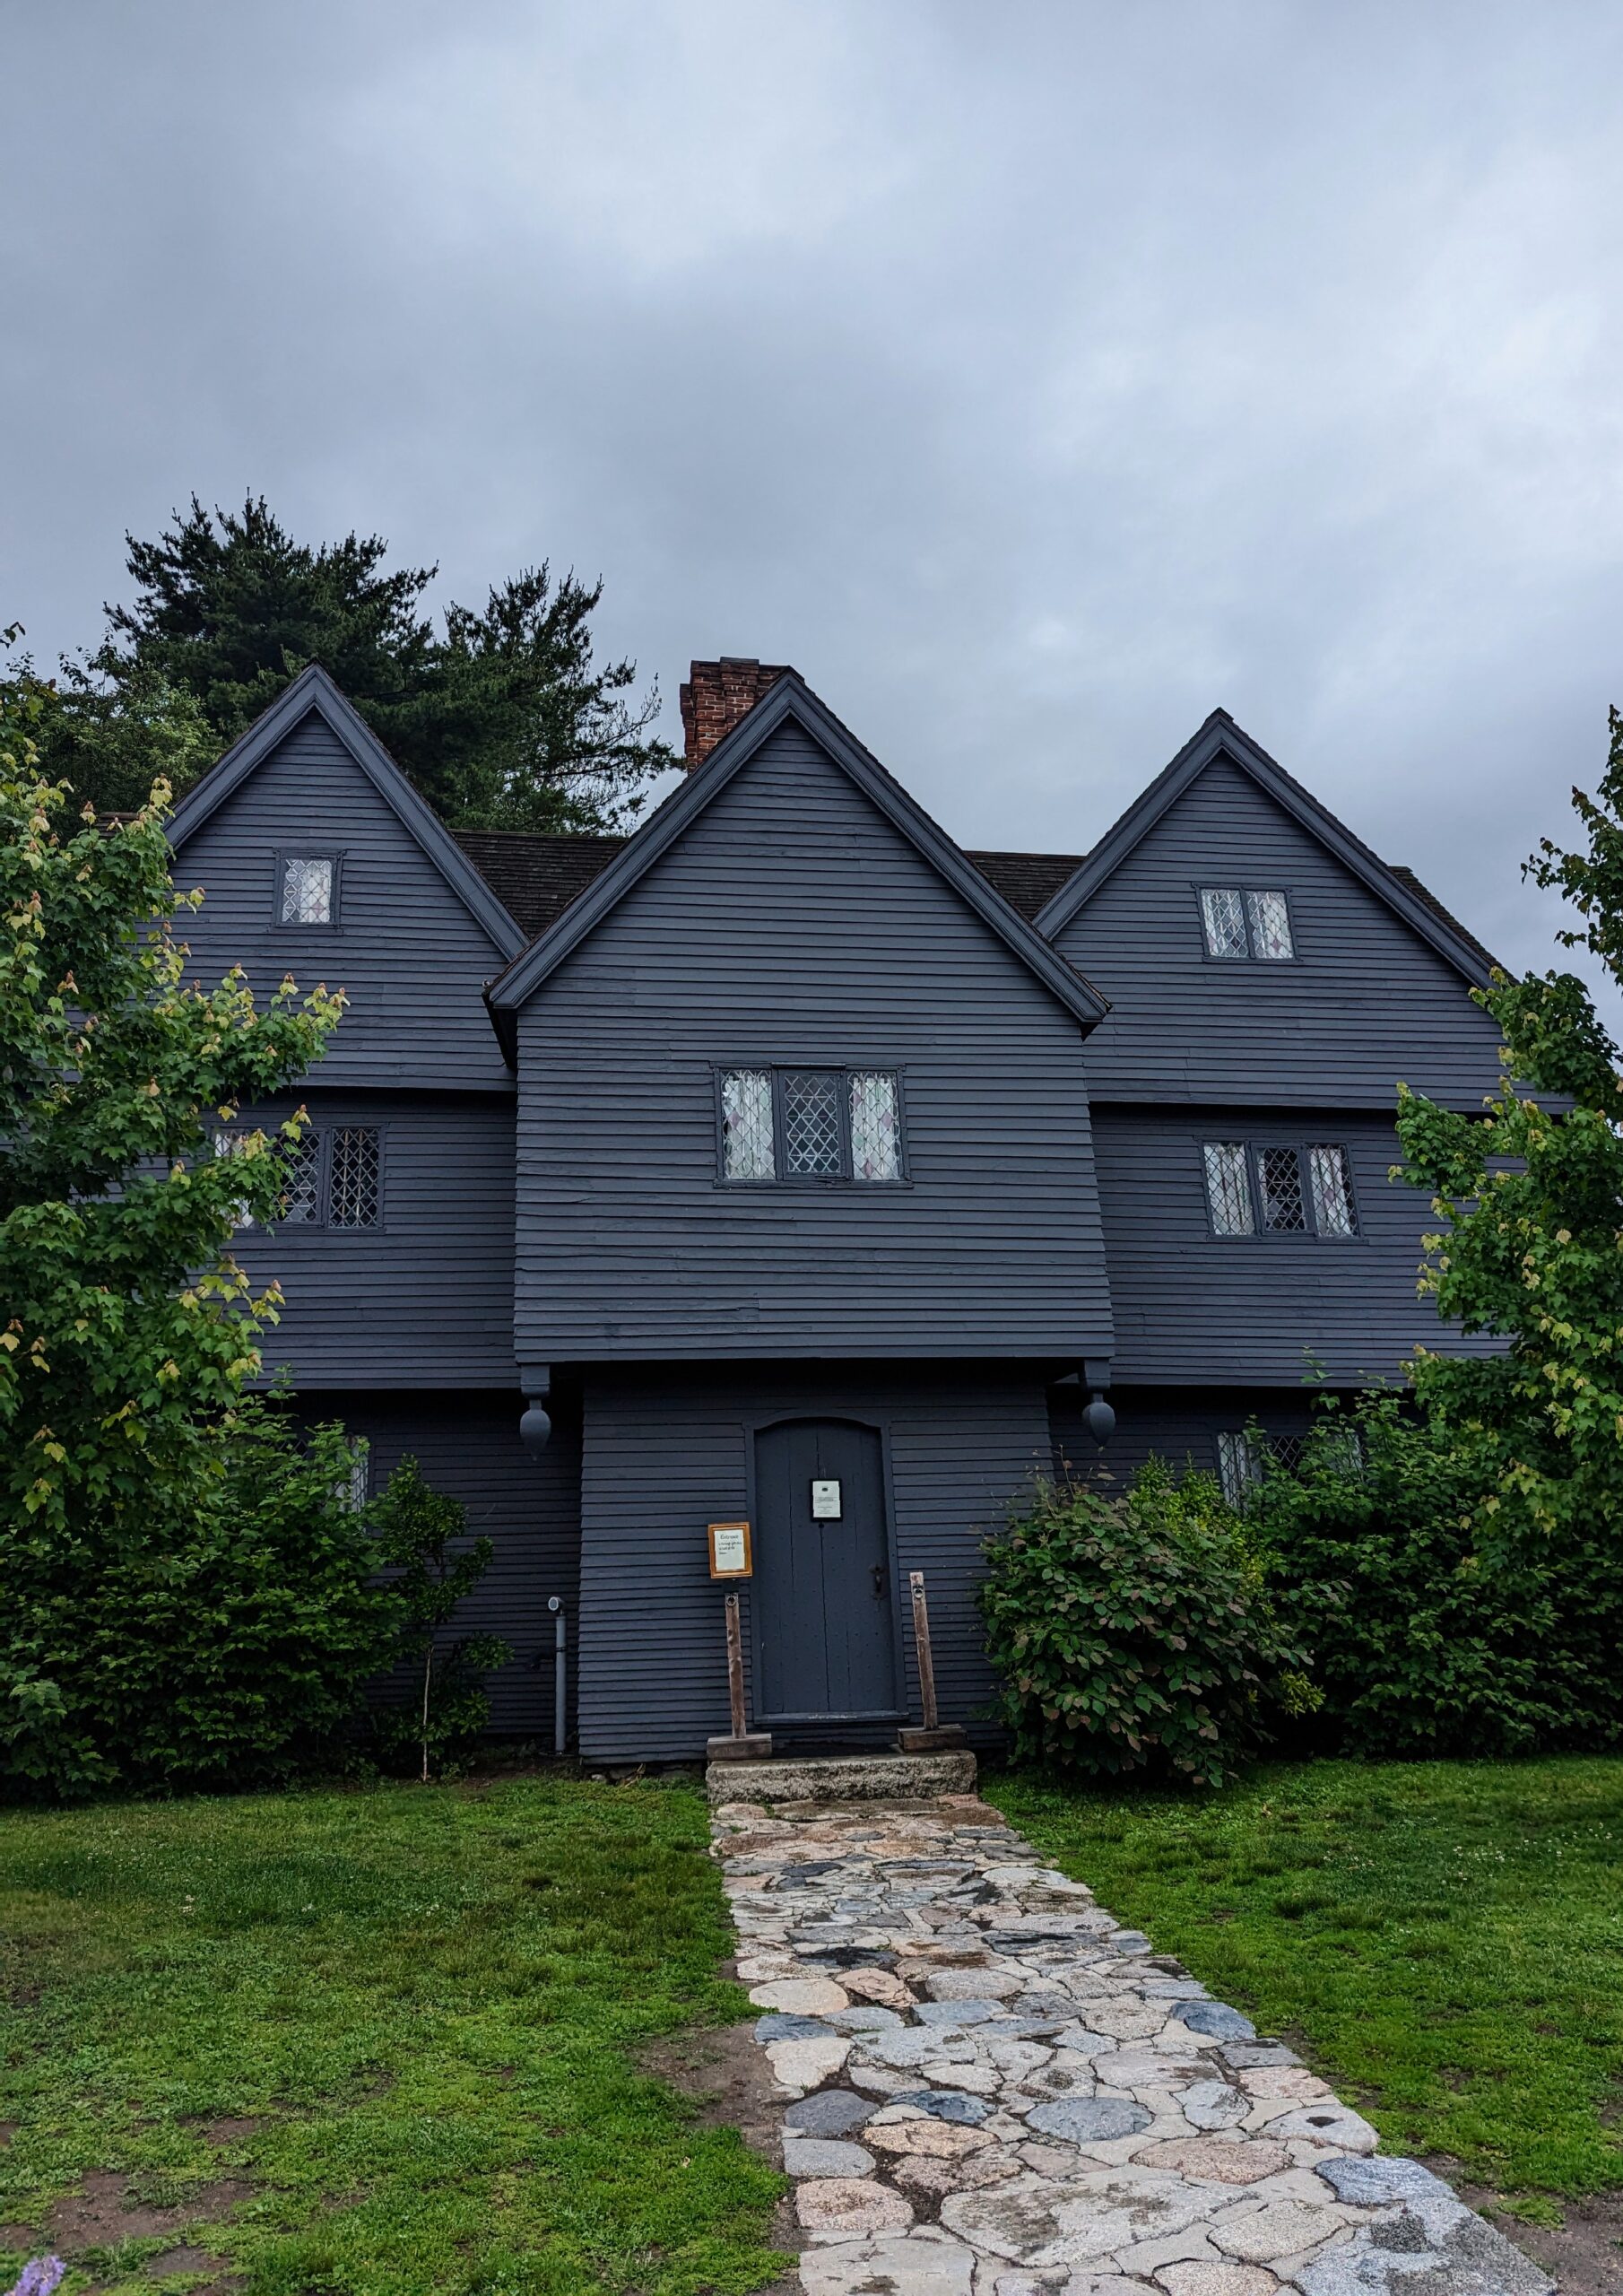 Salem Day Trip Guide | Everything You Need to Know to Plan a Visit from Boston